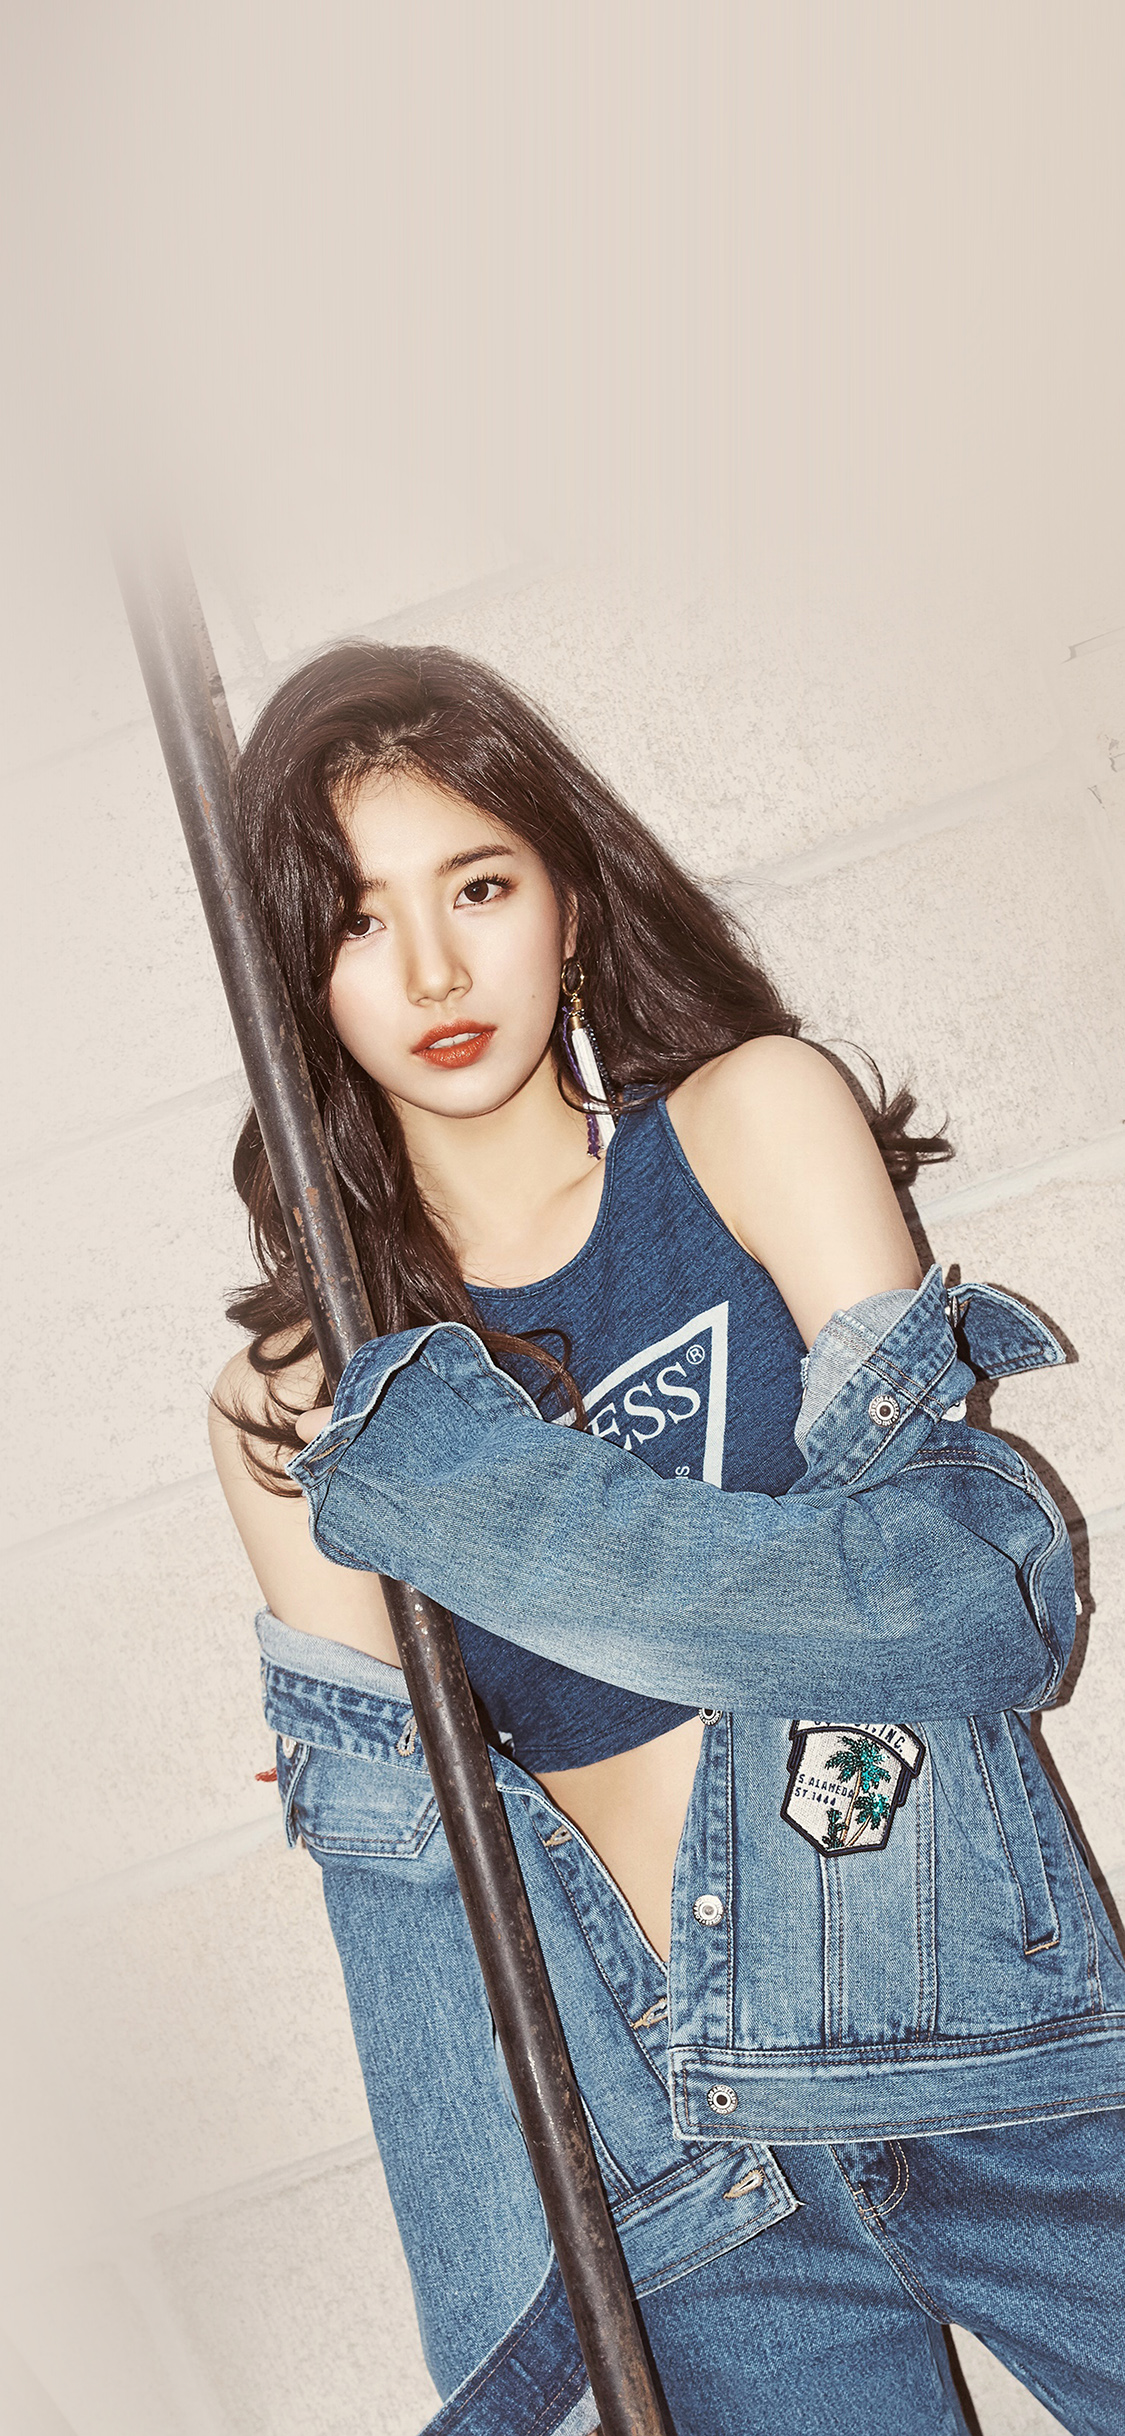 Iphone X - Bae Suzy Guess , HD Wallpaper & Backgrounds